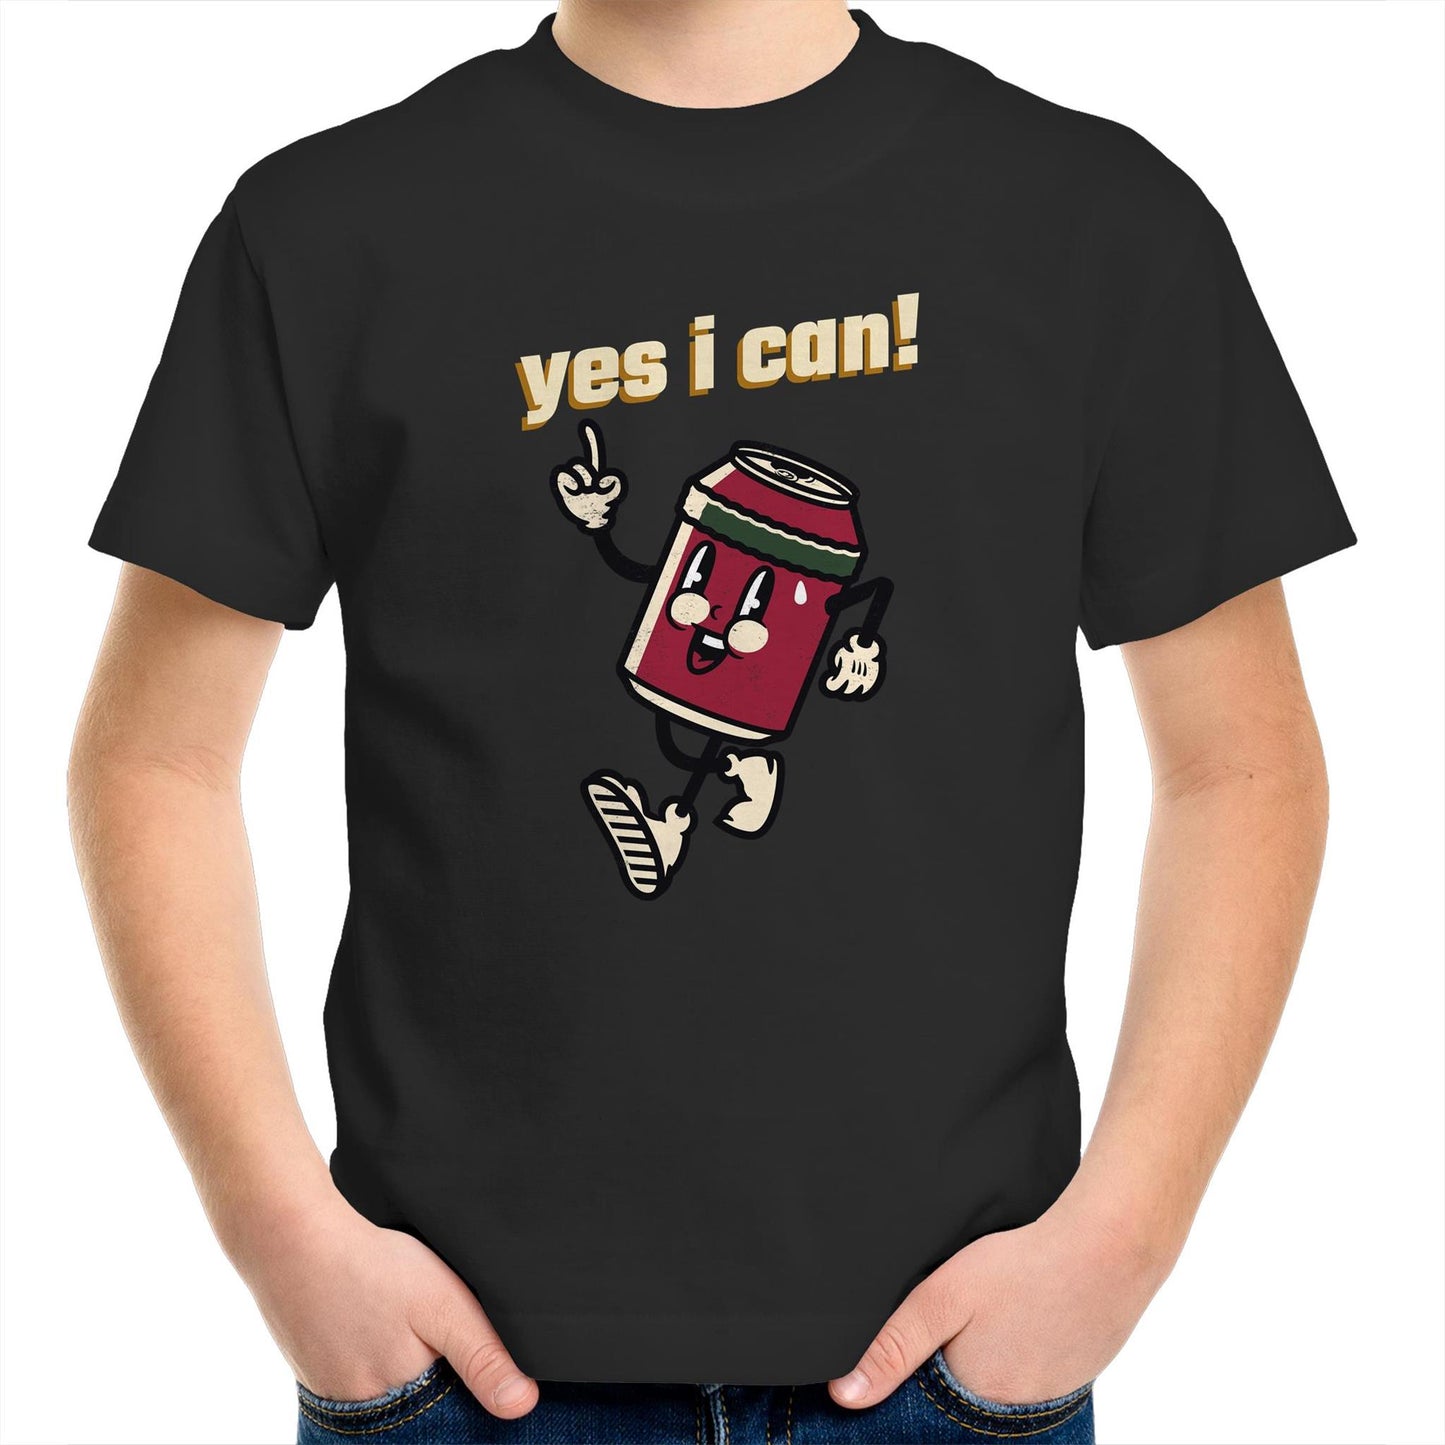 Yes I Can! - Kids Youth Crew T-Shirt Black Kids Youth T-shirt Motivation Retro